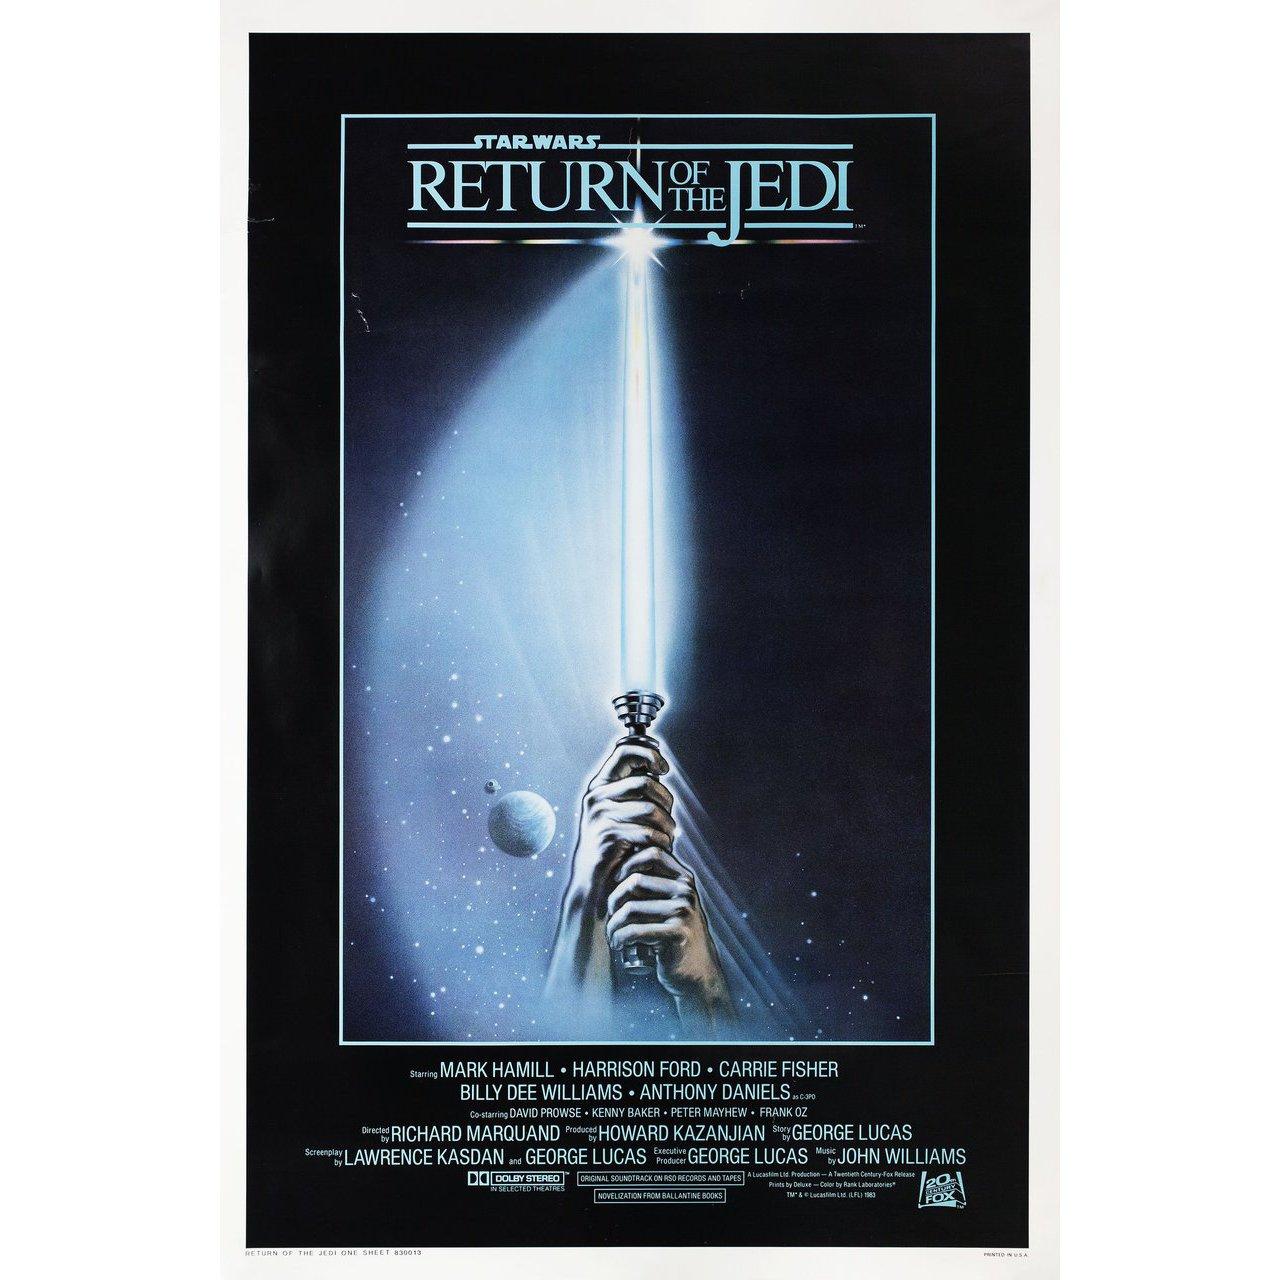 Original 1983 U.S. one sheet poster by Tim Reamer for the film “Return of the Jedi” (Star Wars: Episode VI) directed by Richard Marquand with Mark Hamill / Harrison Ford / Carrie Fisher / Billy Dee Williams. Very good-fine condition, rolled with